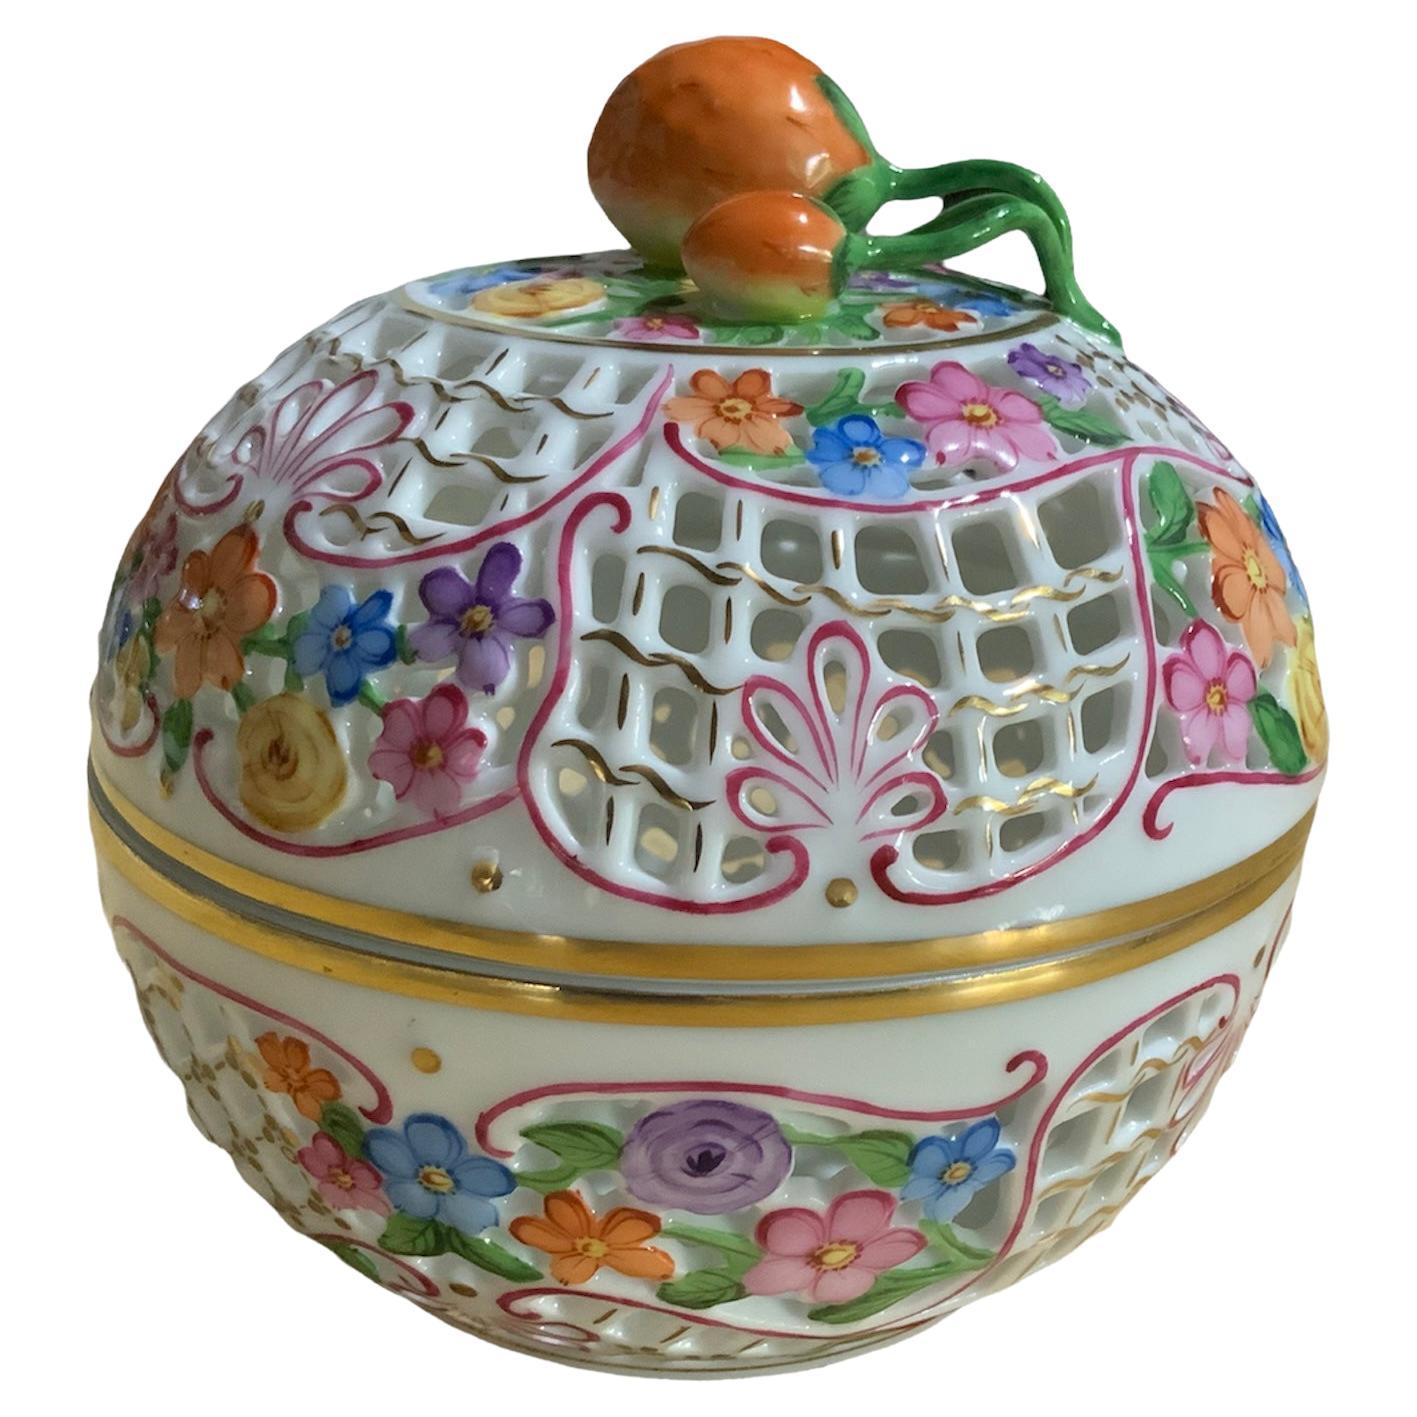 Herend Porcelain Reticulated Potpourri / Bombonniere Lidded Box For Sale